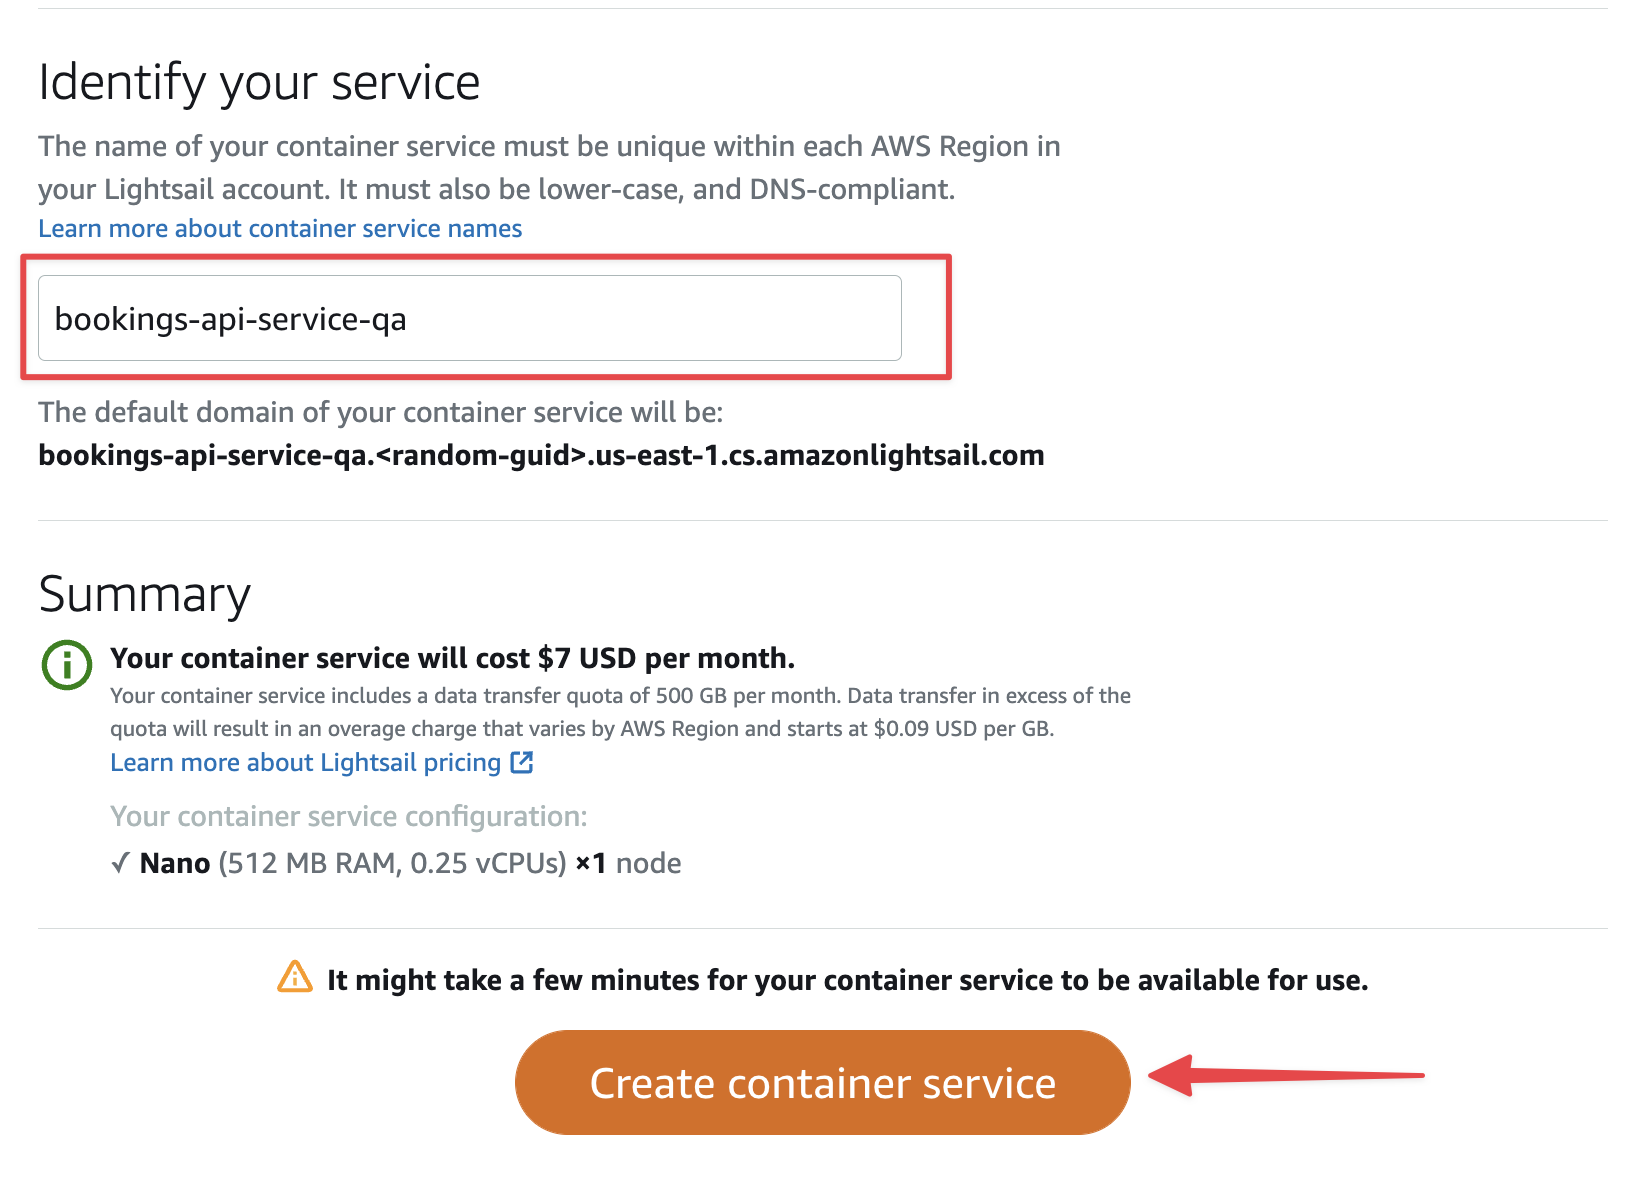 The Identify your service section of the Create container service form.